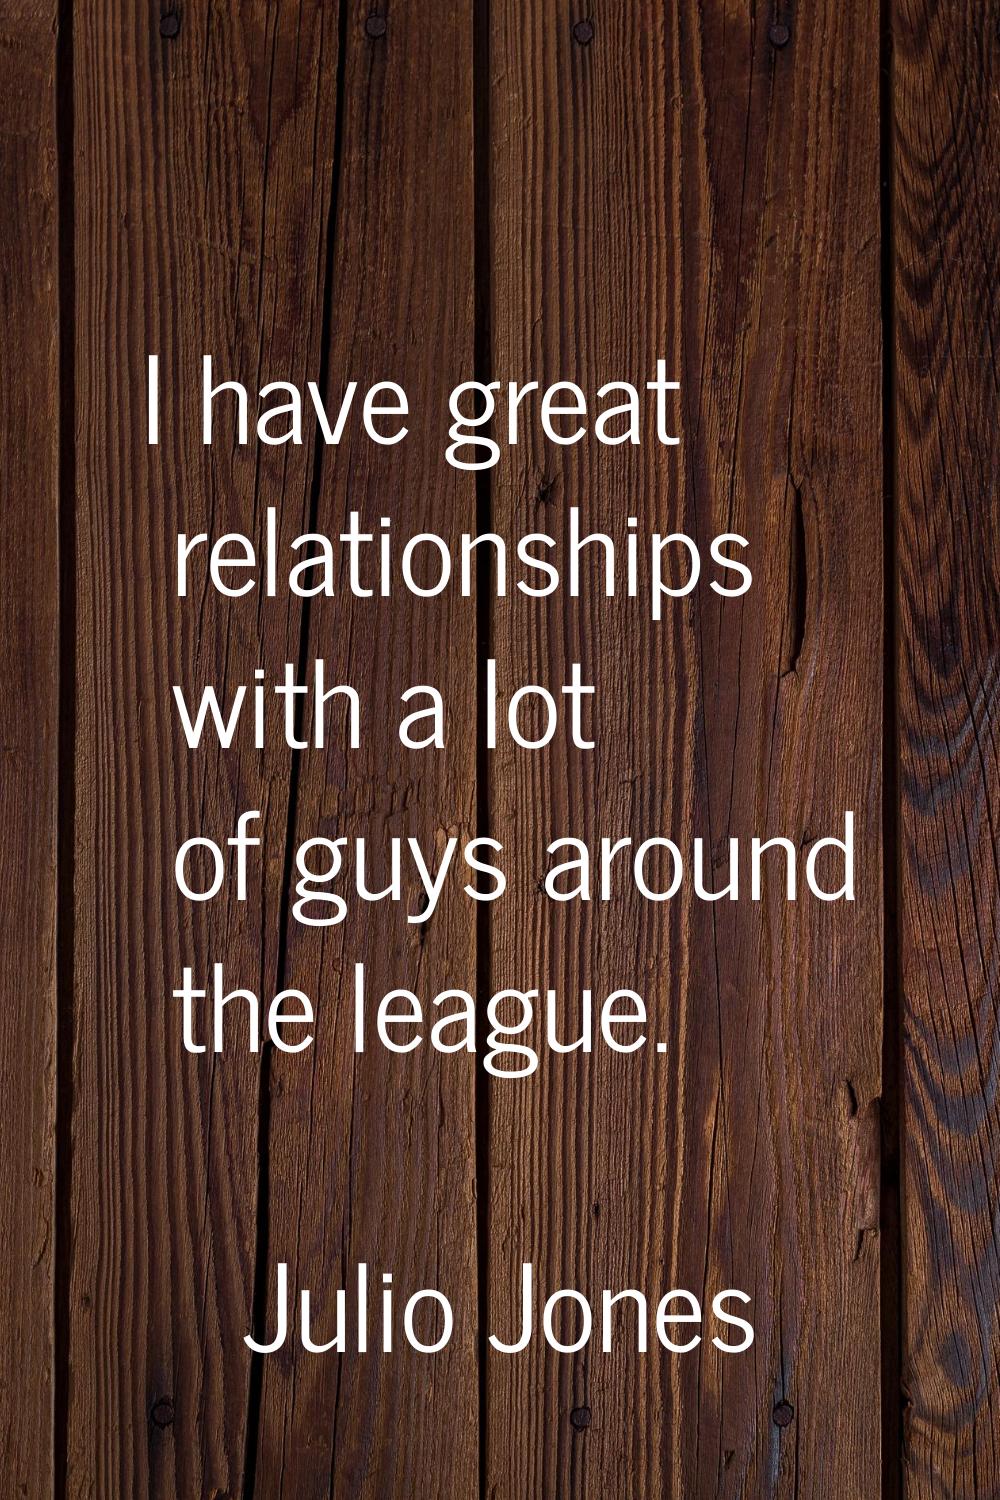 I have great relationships with a lot of guys around the league.